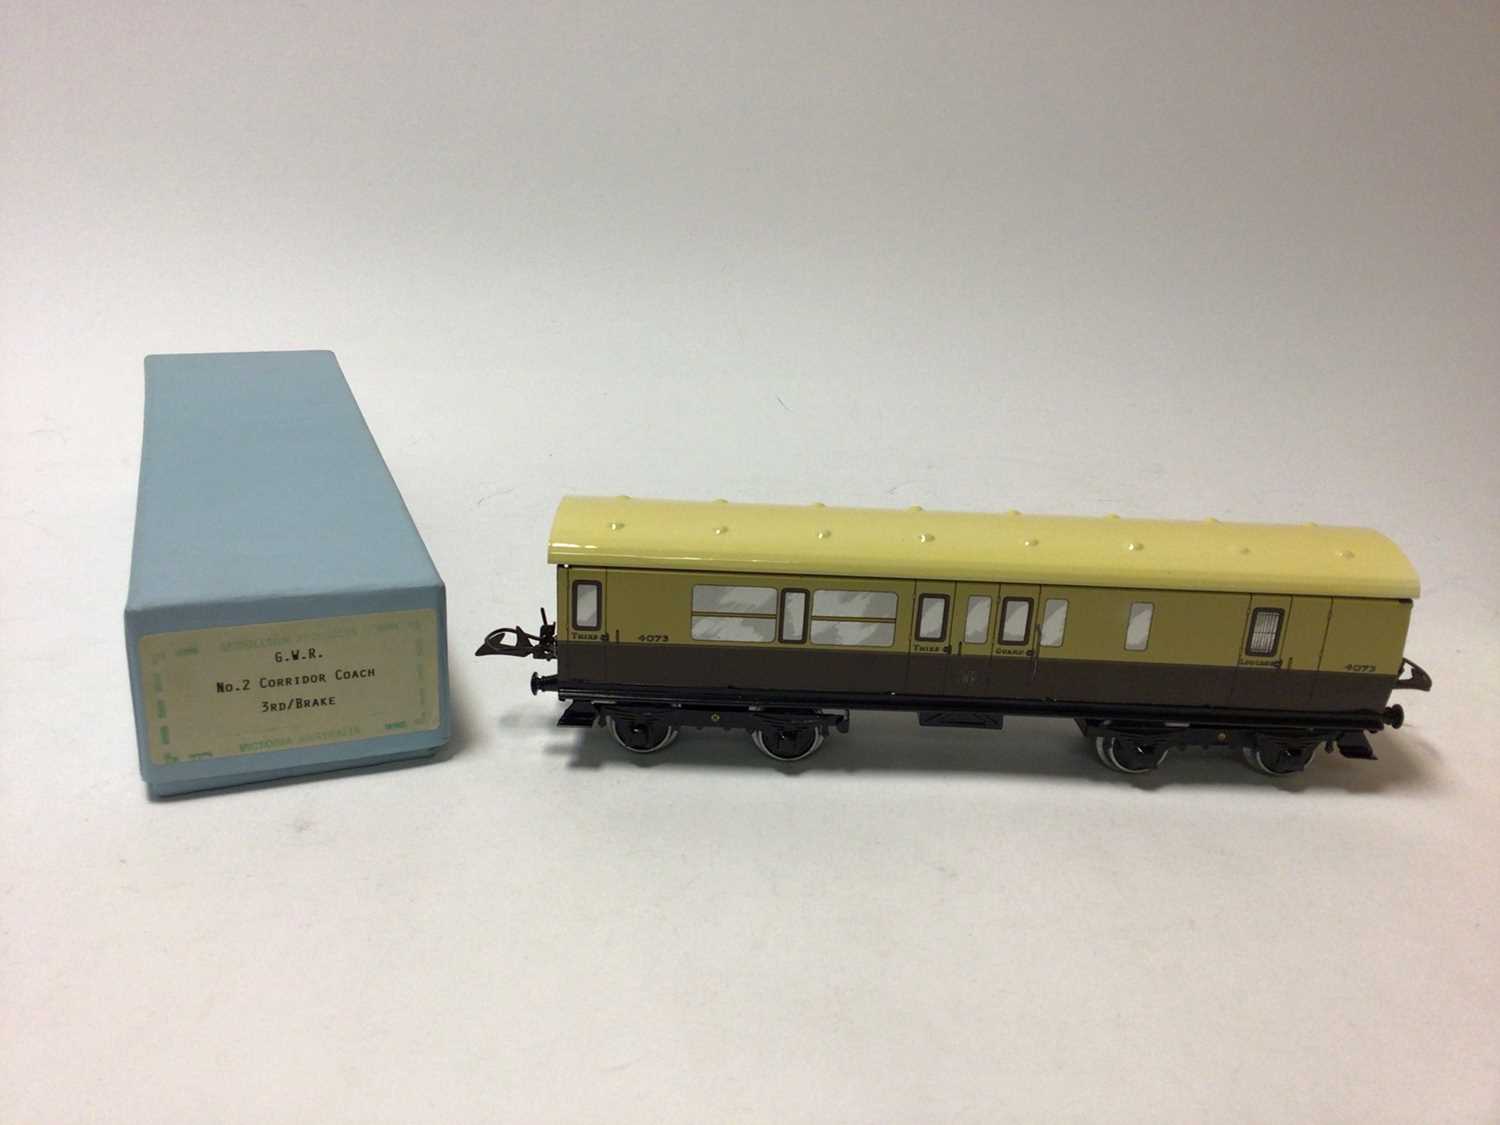 Lot 37 - Railway Middleton Products Australia Hornby Series stle O gauge Tinplate GWR No.2 Corridor Coach 3rd/Brake, boxed